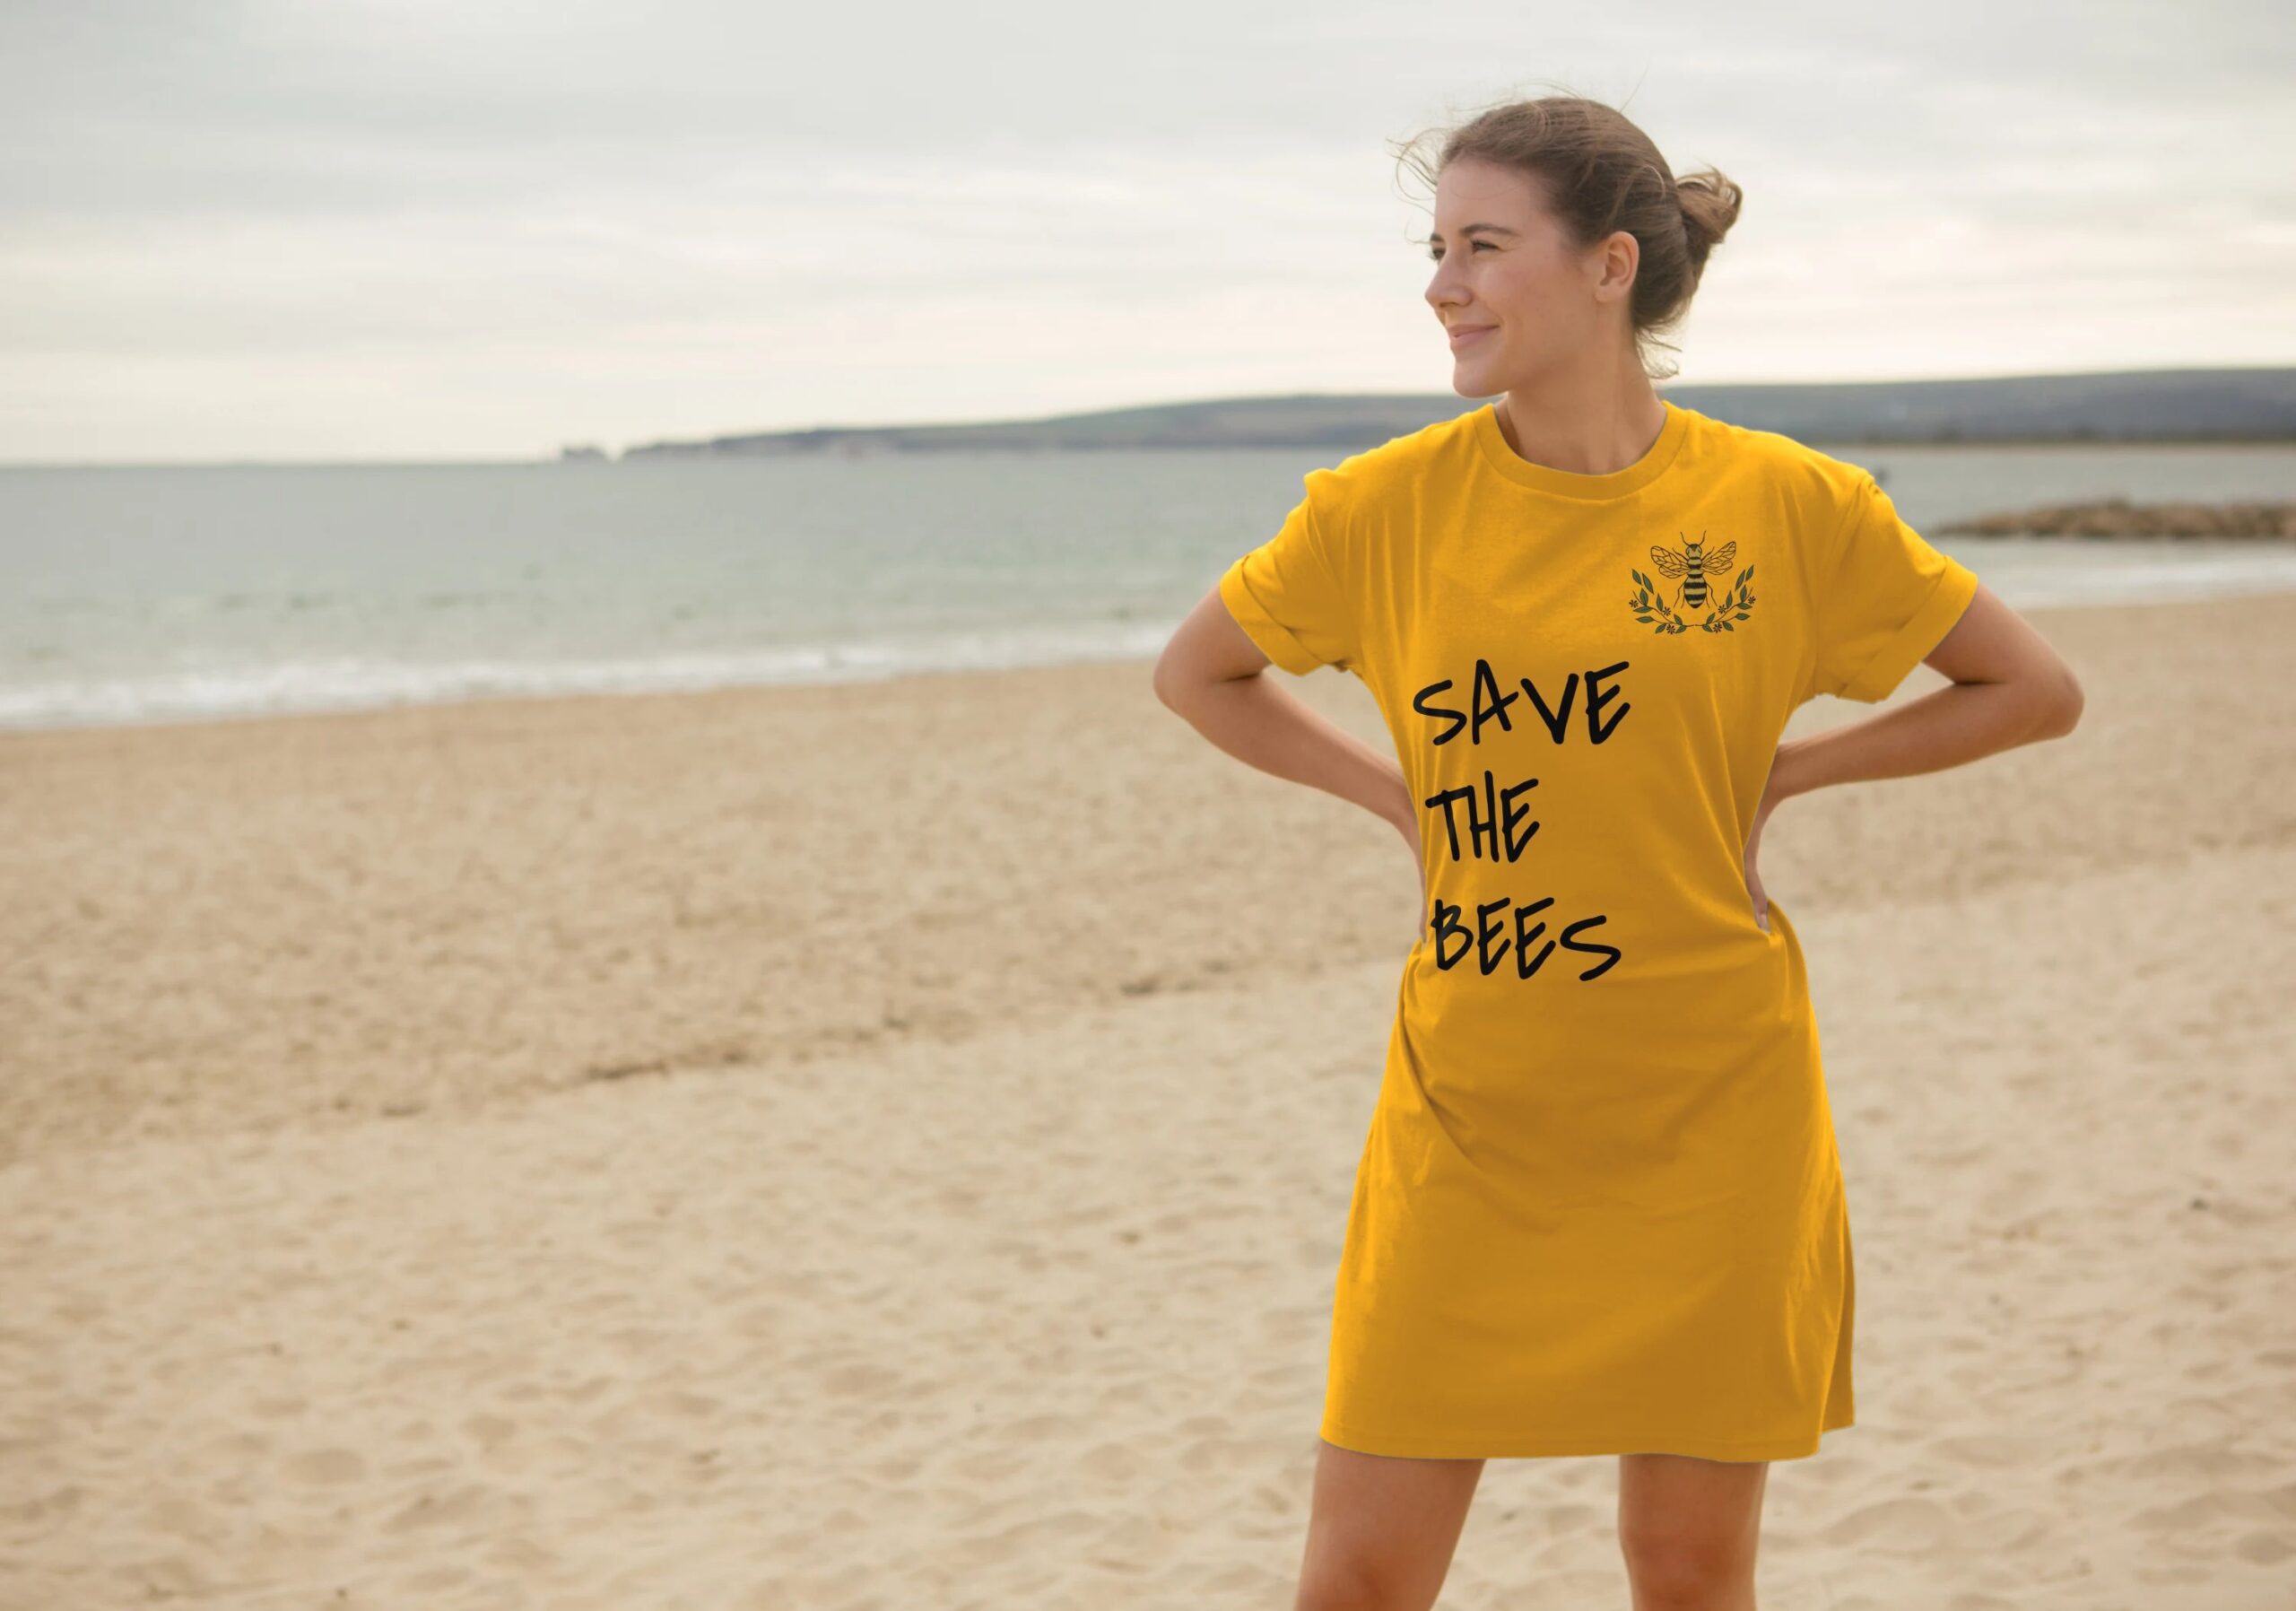 A Sustainable T-Shirt: Addressing the Environmental Effects - Girl with orange t-shirt on beach